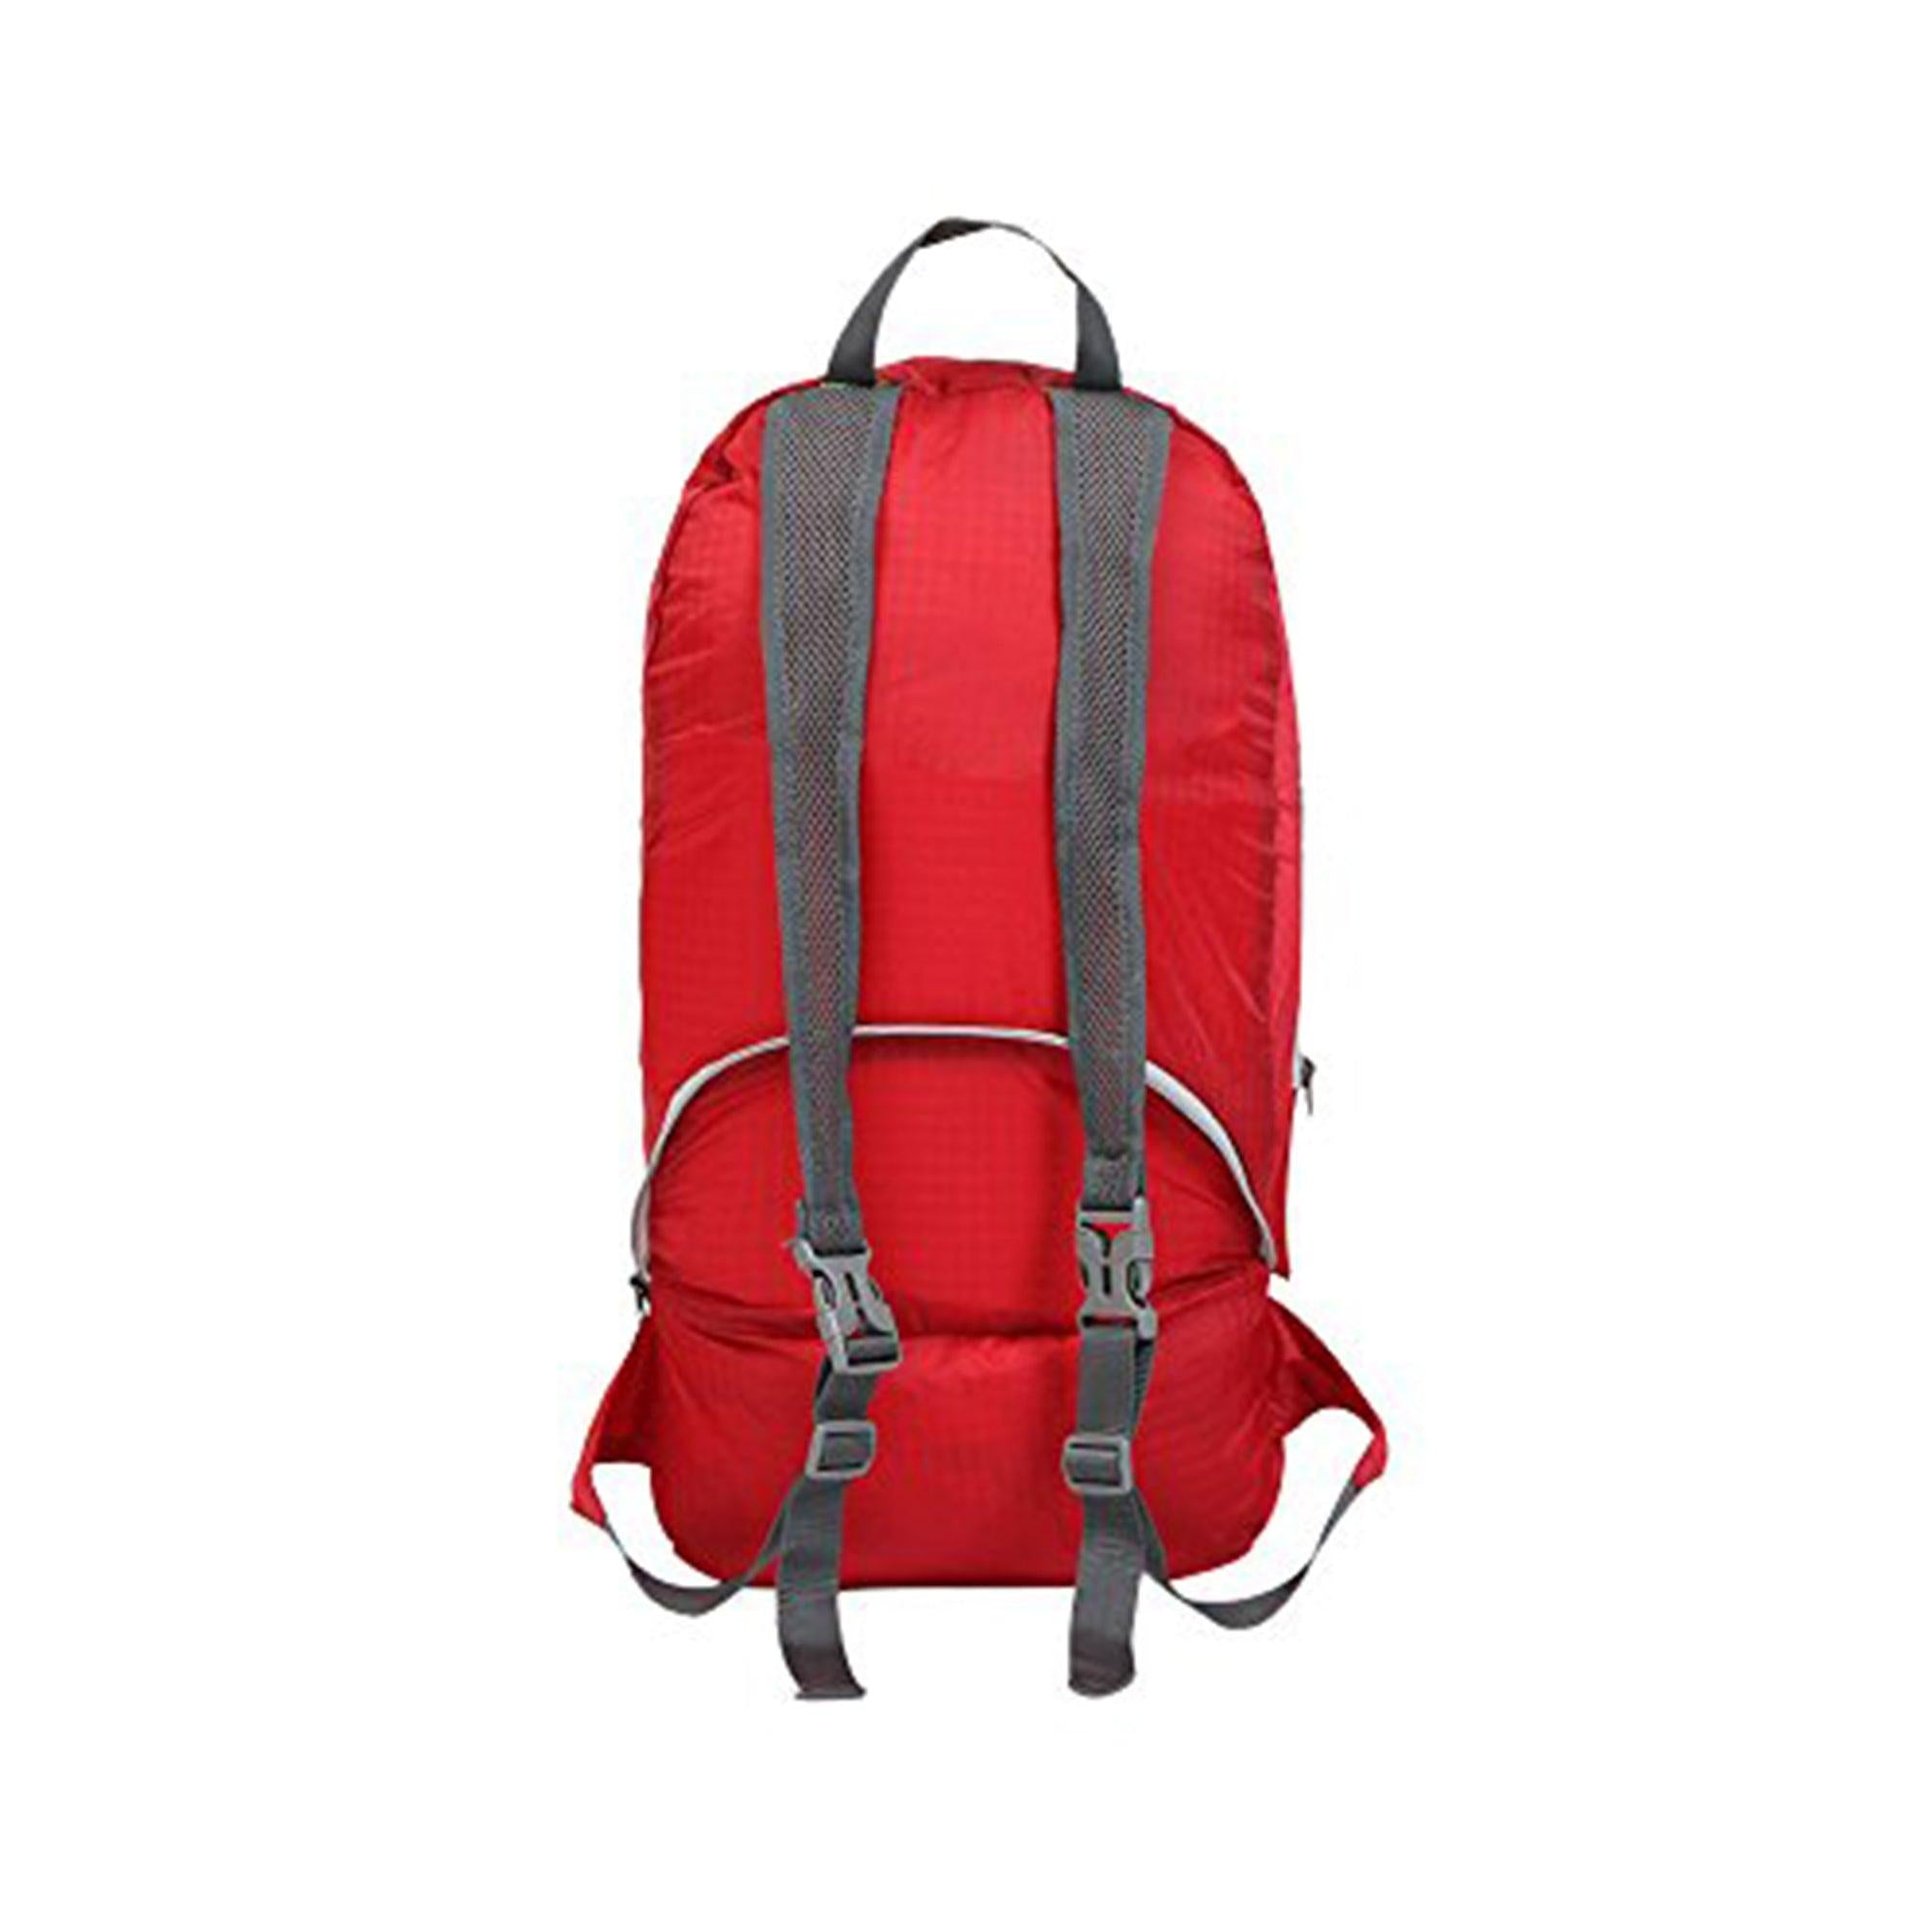 Foldable Hiking Backpack Lightweight Travel Outdoor Camping Daypack with a Waist Bag Pack, Red - Bosonshop